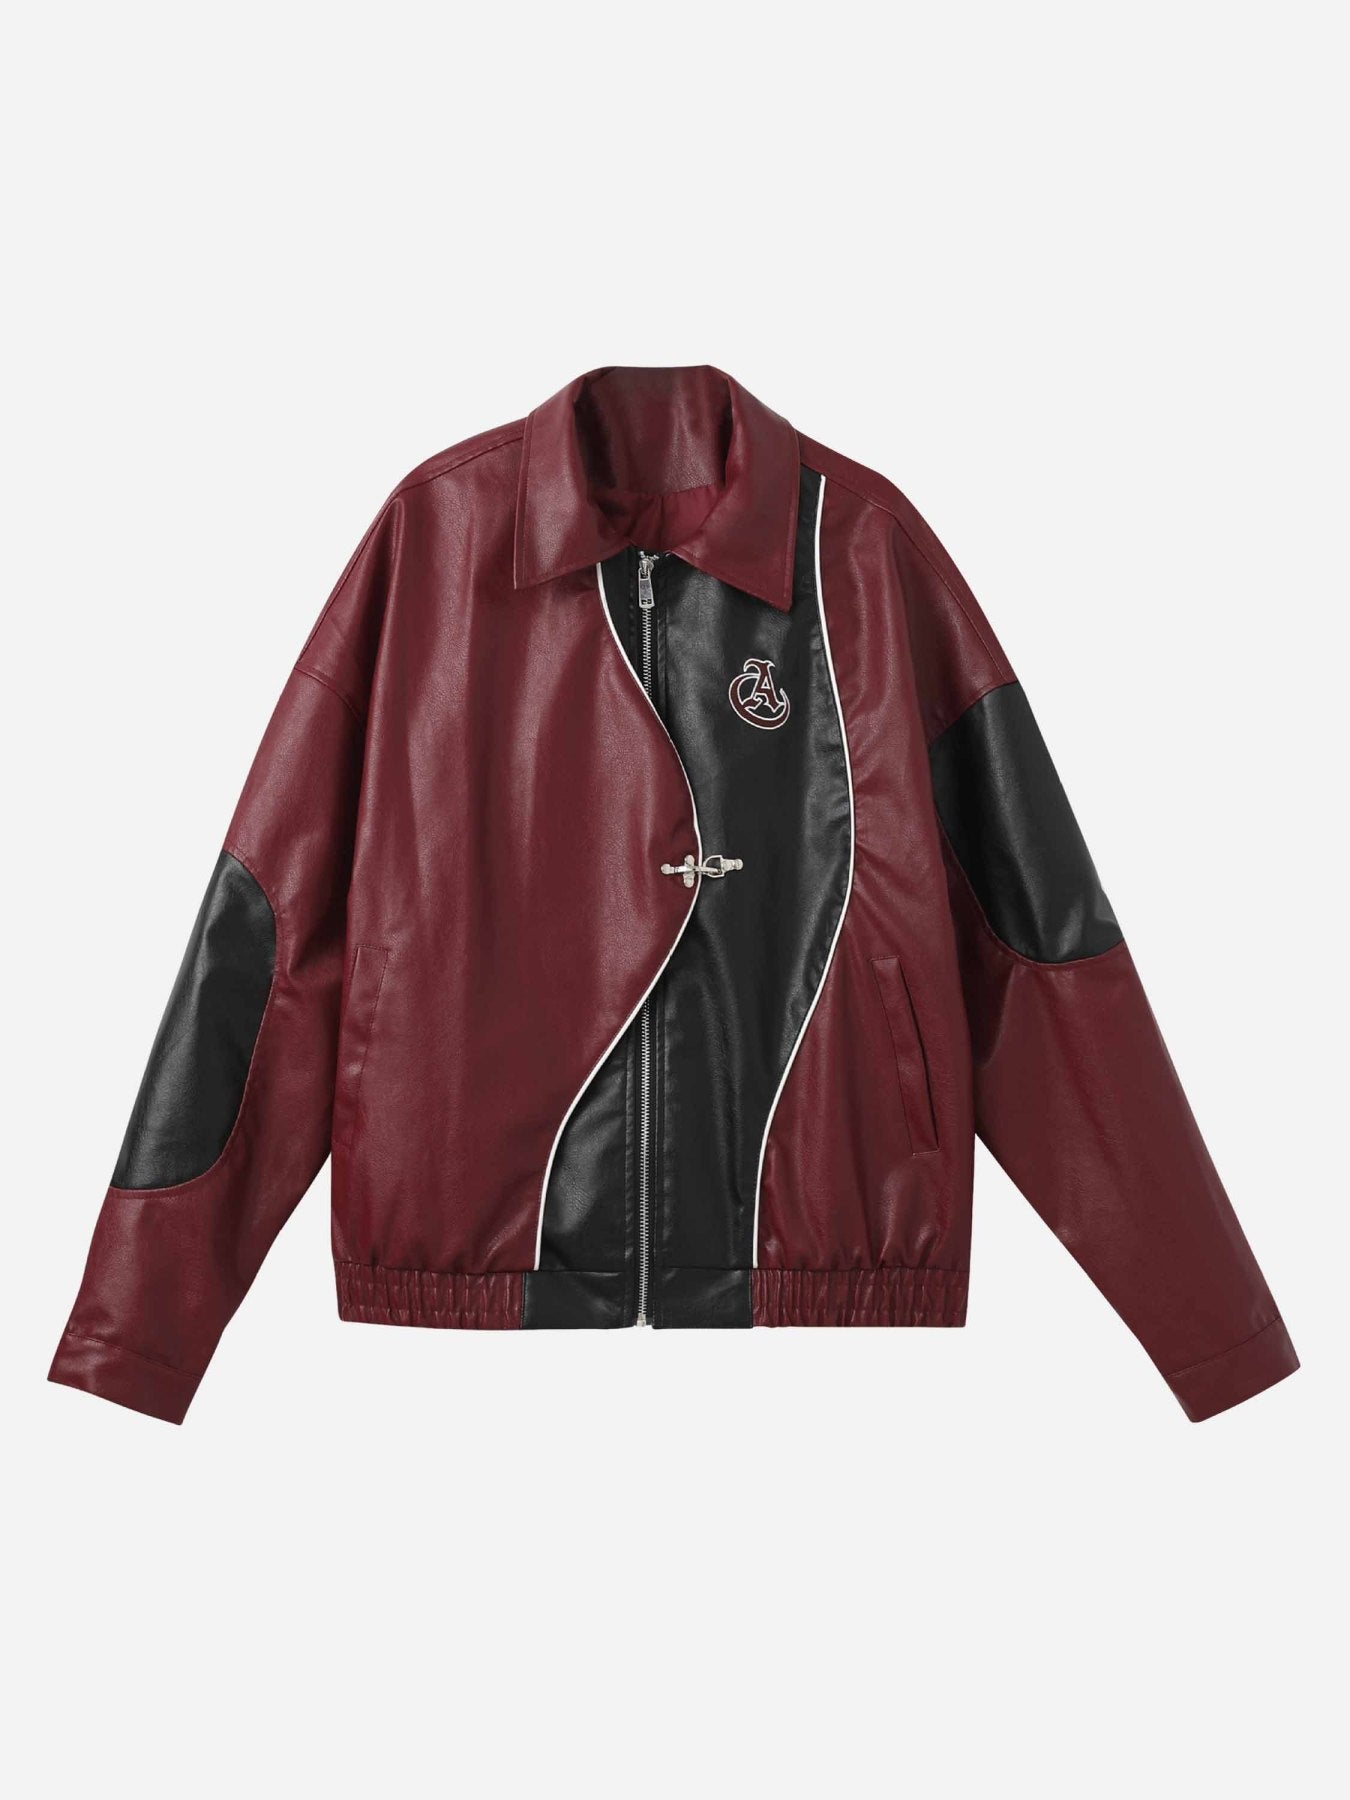 The Supermade Loose Patchwork PU Leather Jacket